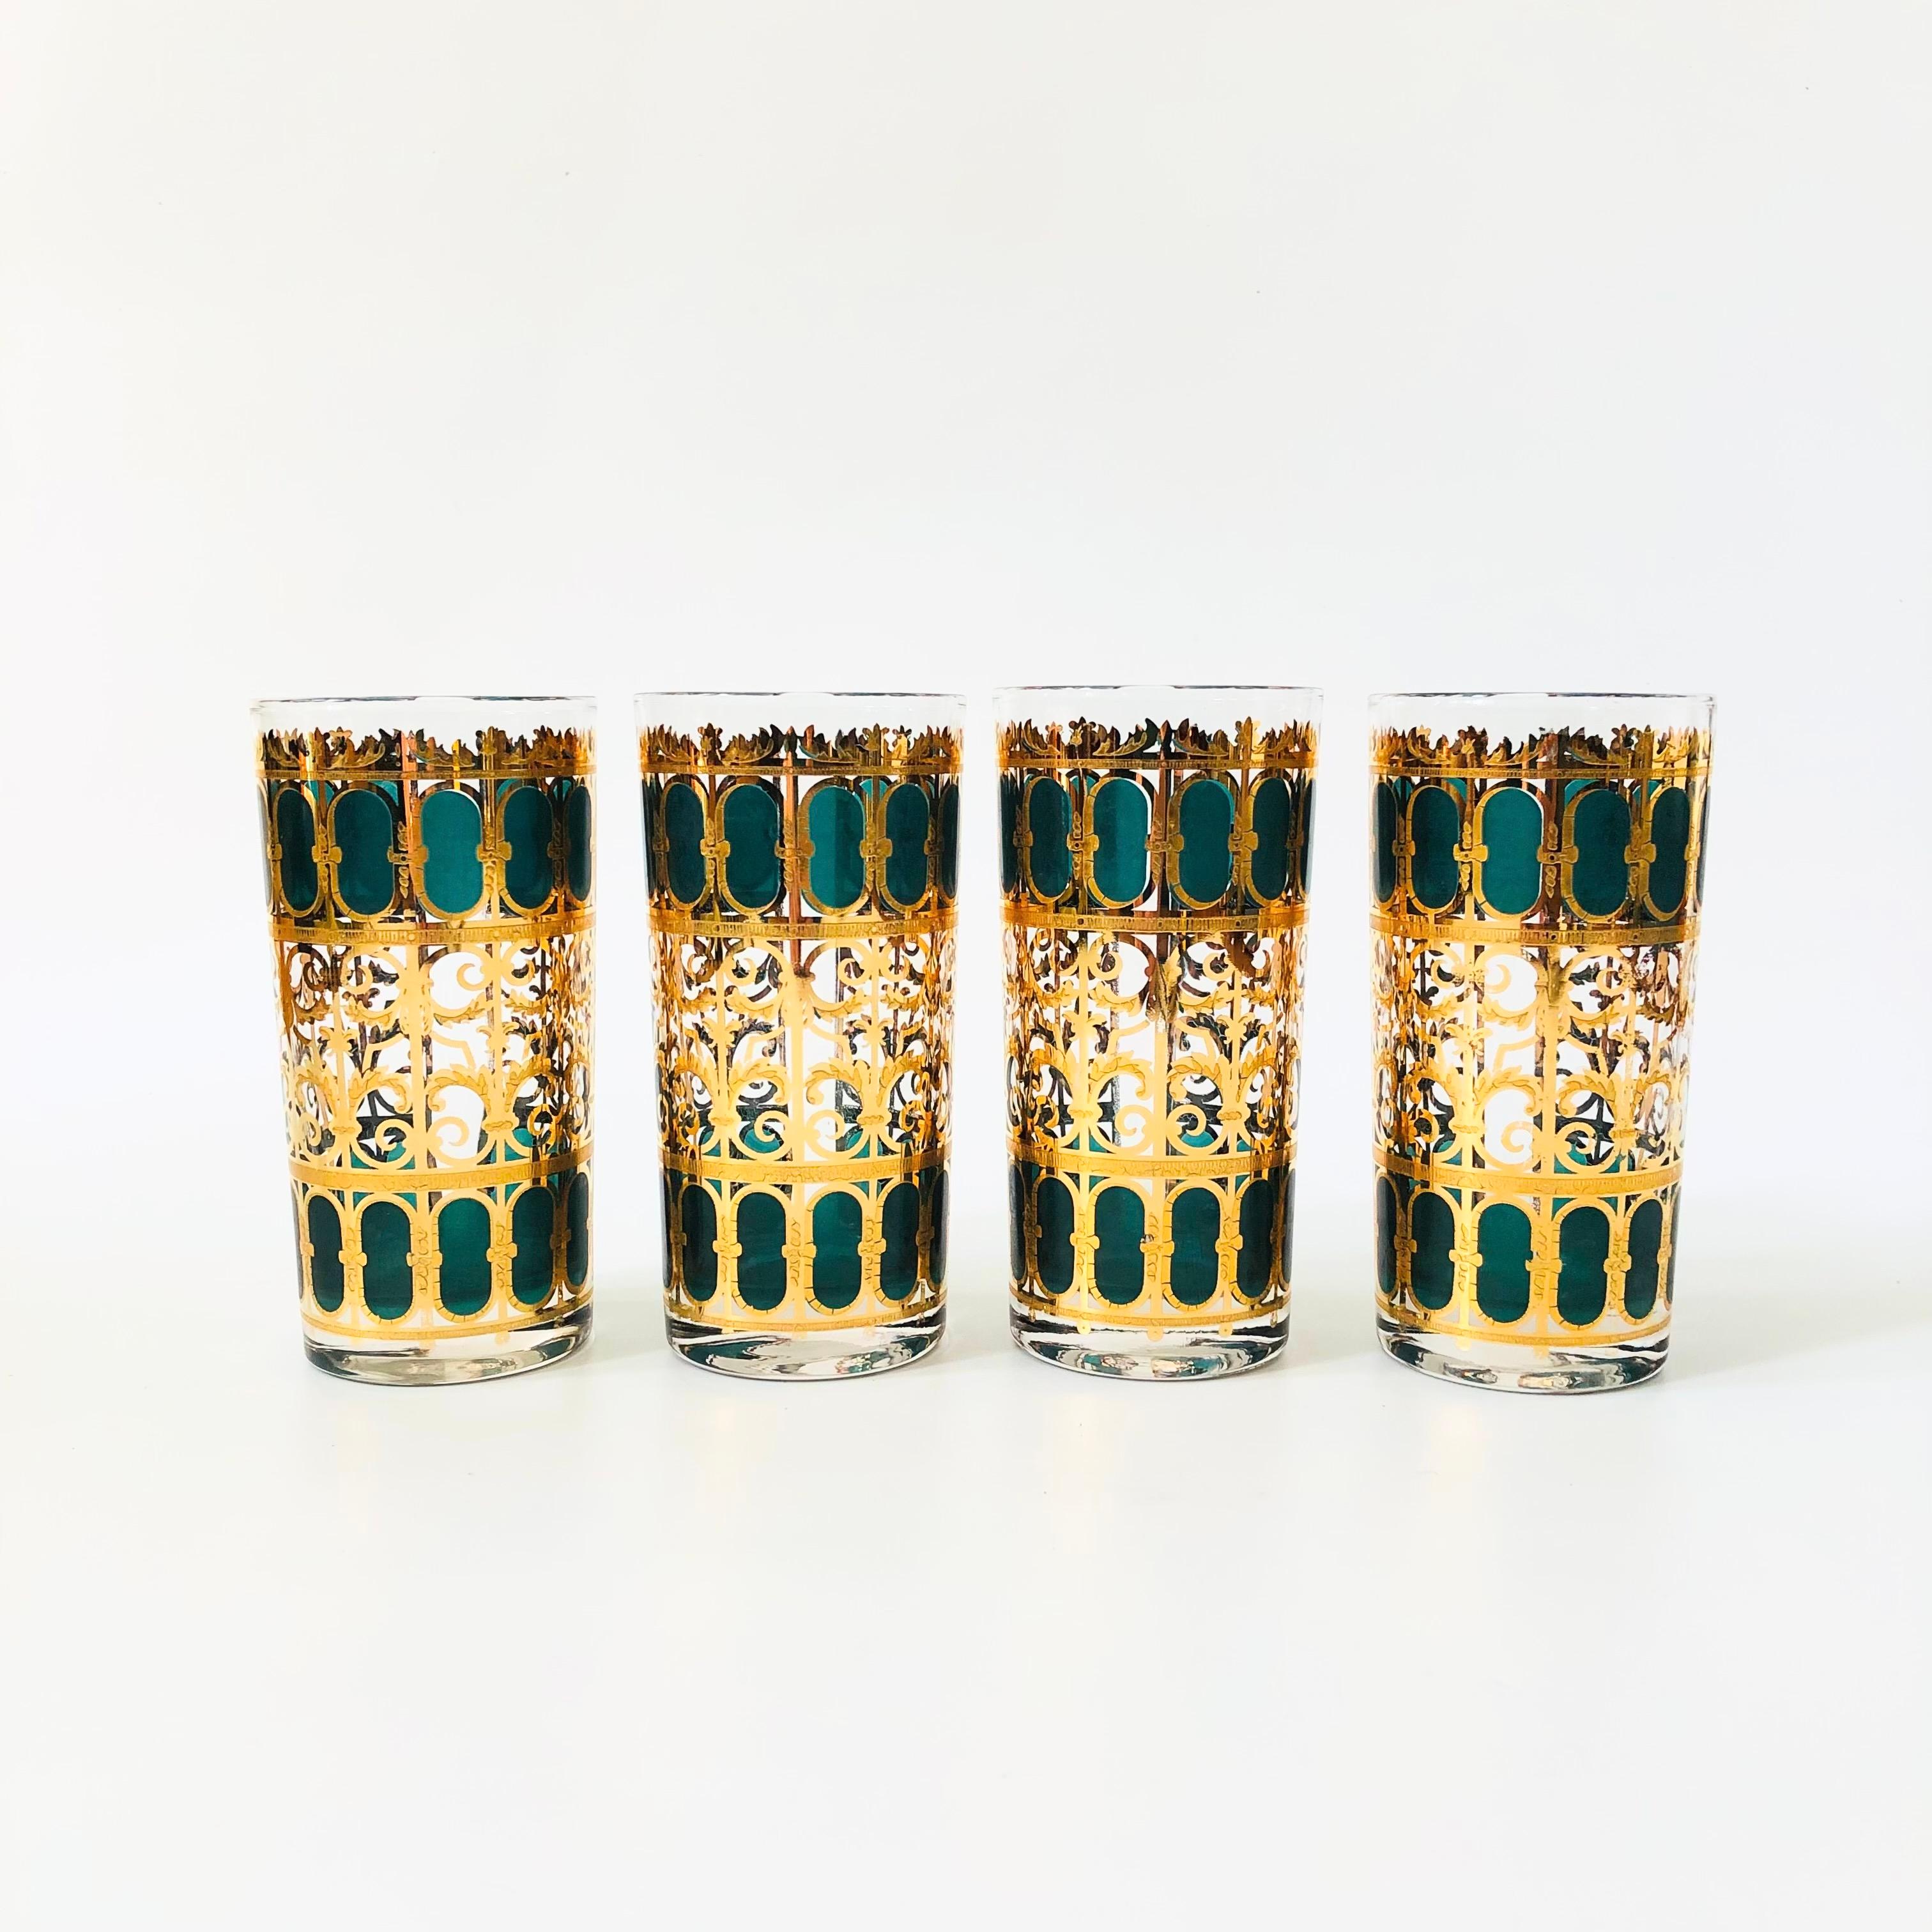 A set of 4 mid century highball tumblers by Culver. Each piece is wrapped in a beautiful 22 kt gold in the 